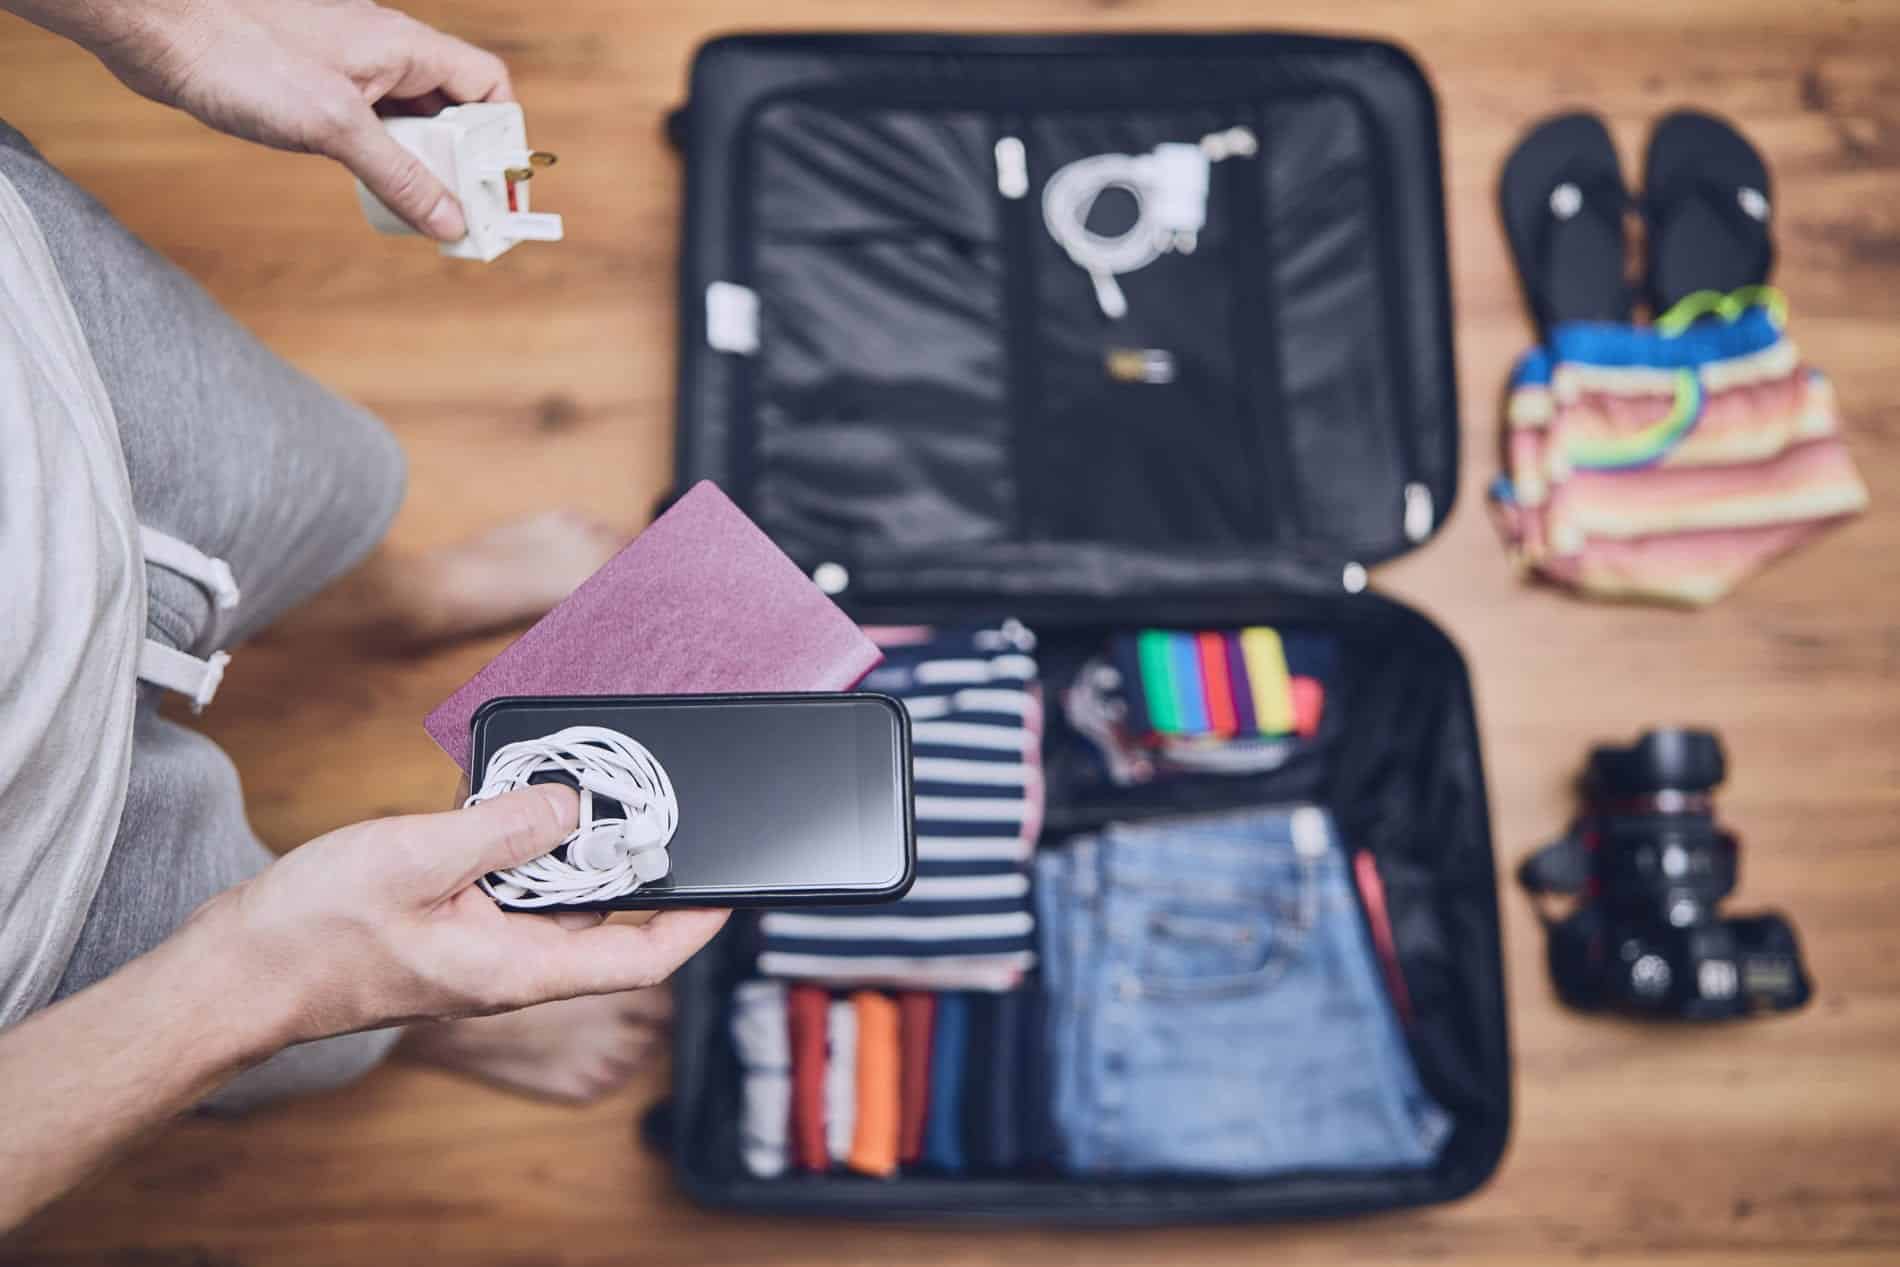 https://www.sntravel.co.uk/wp-content/uploads/2019/04/packing-gadgets.jpg